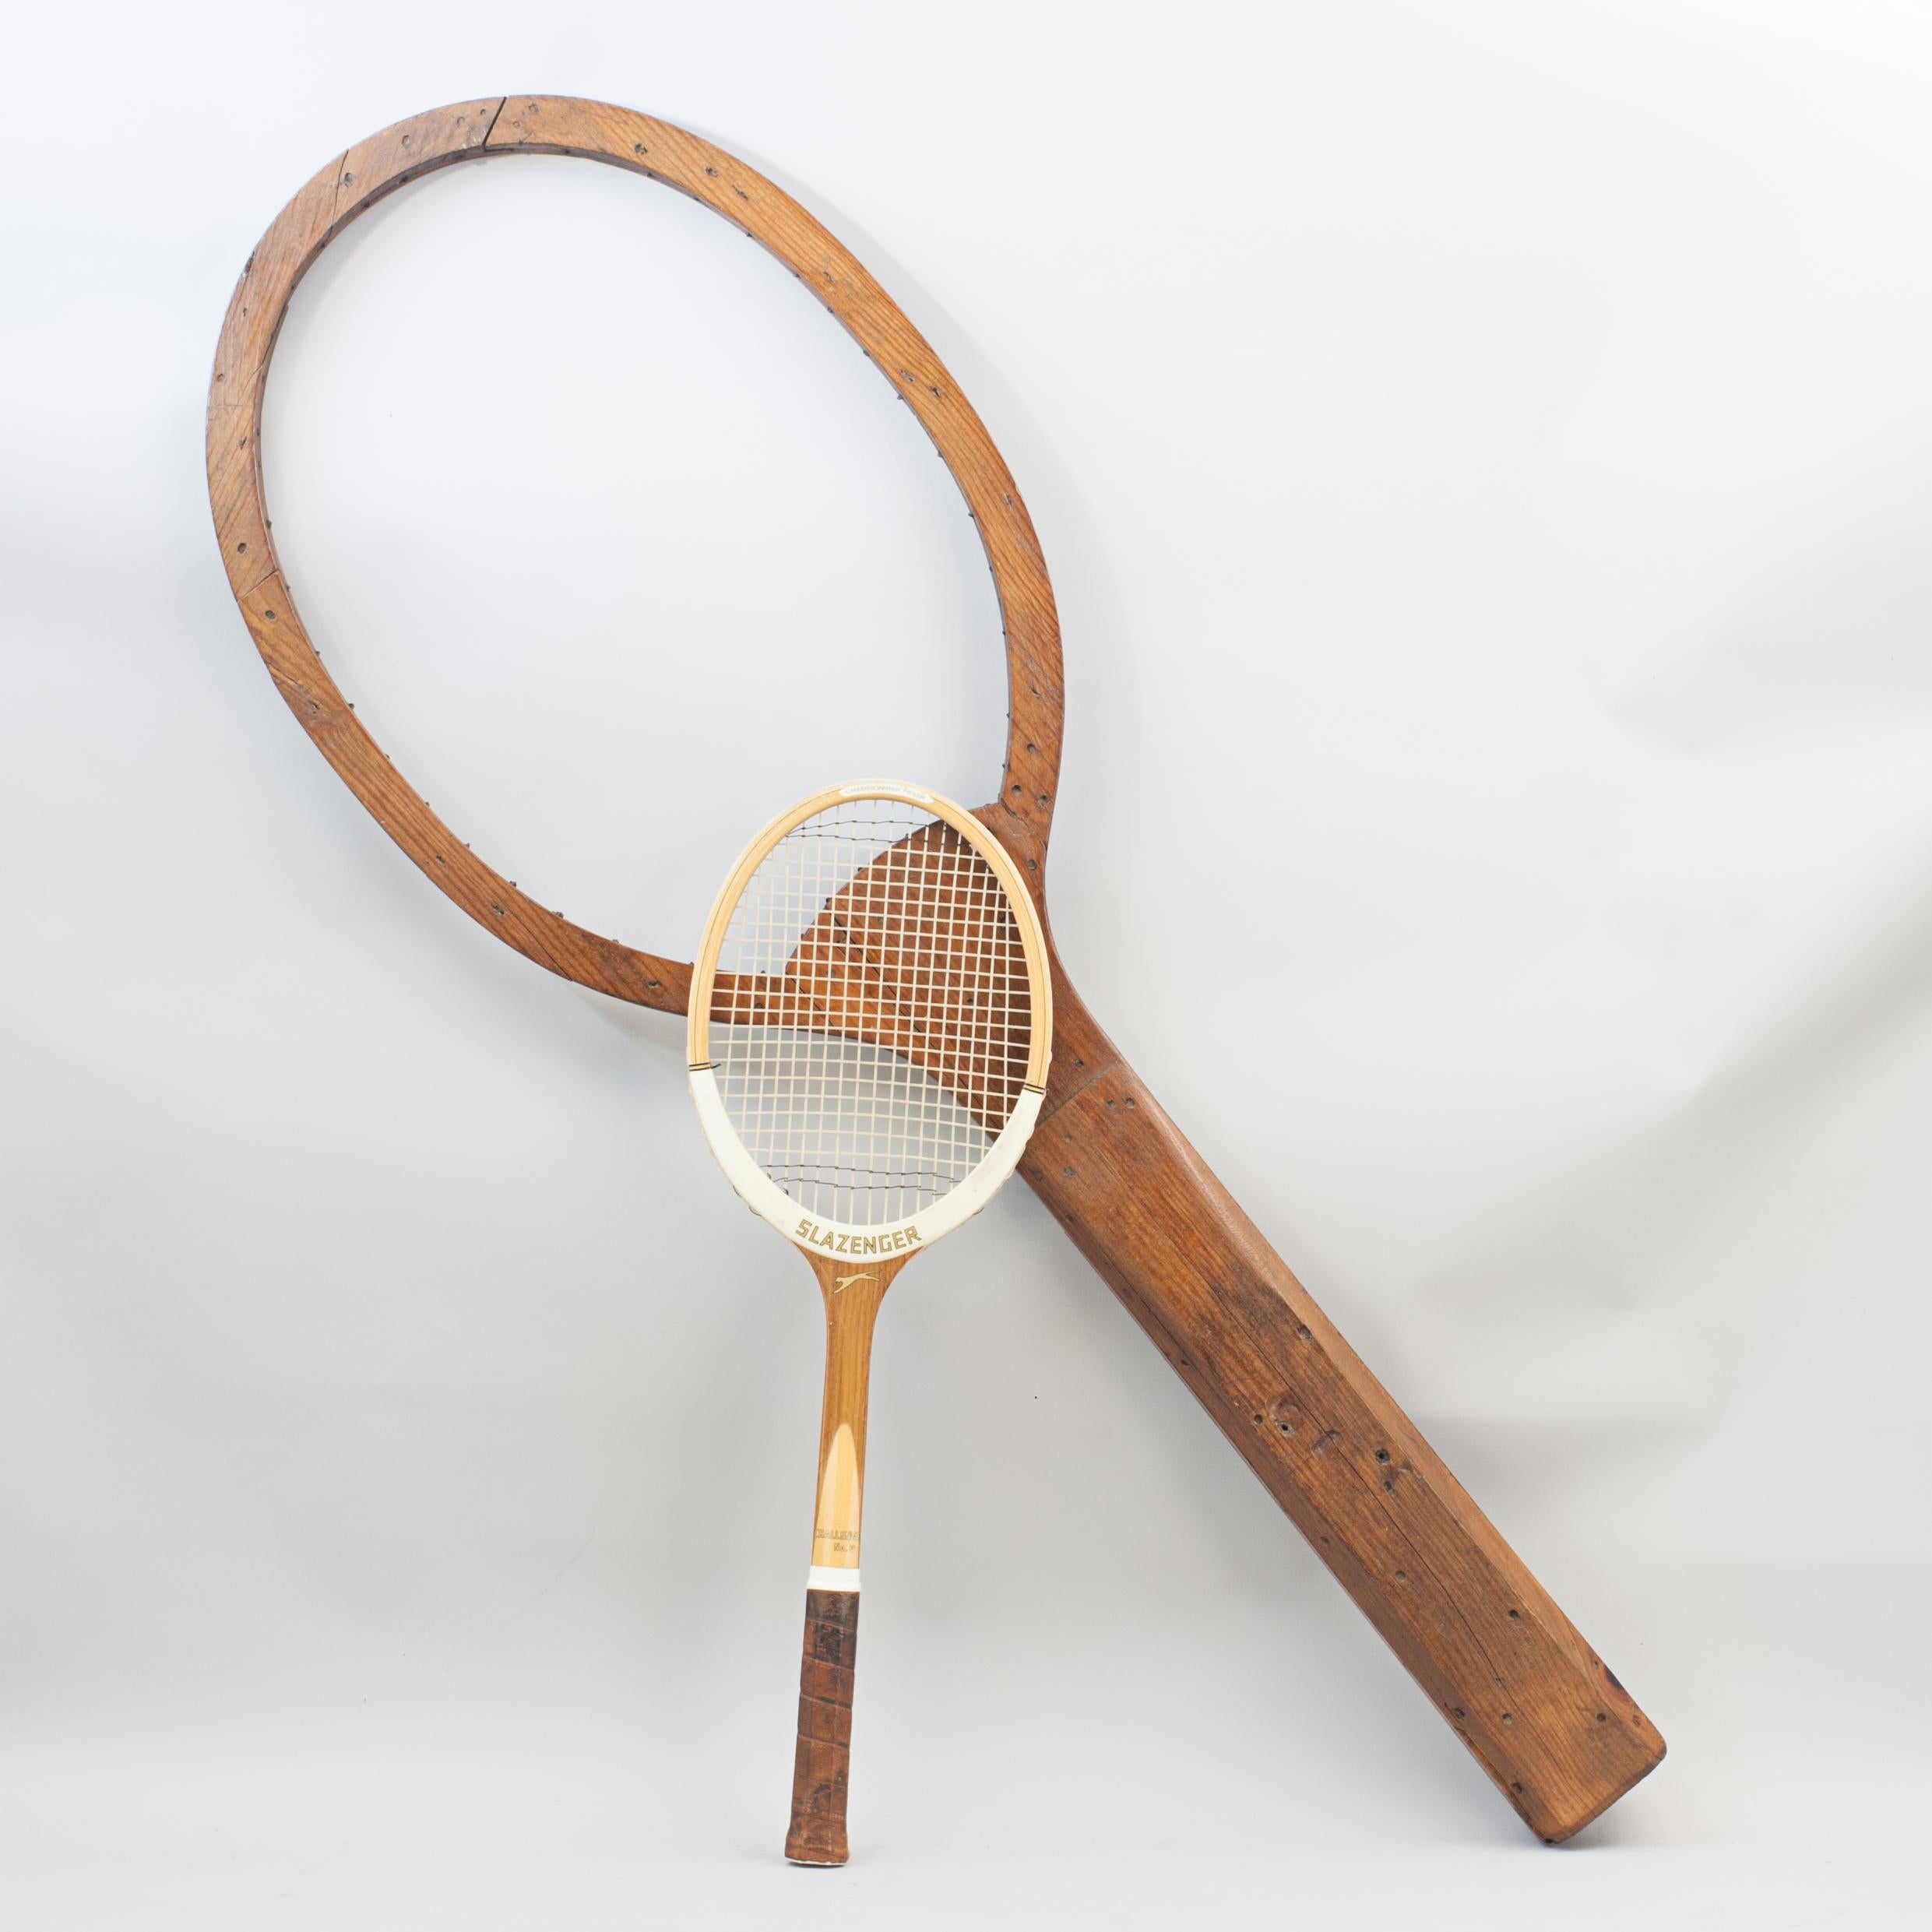 Oversized Tennis Racket.
An unusual oversized wooden lawn tennis racket, shop display or racket advertising. There are no sponsor decals on the racket. It has a good rustic charm to it, no stringing. Nice display piece.

Dimensions:
Height
134